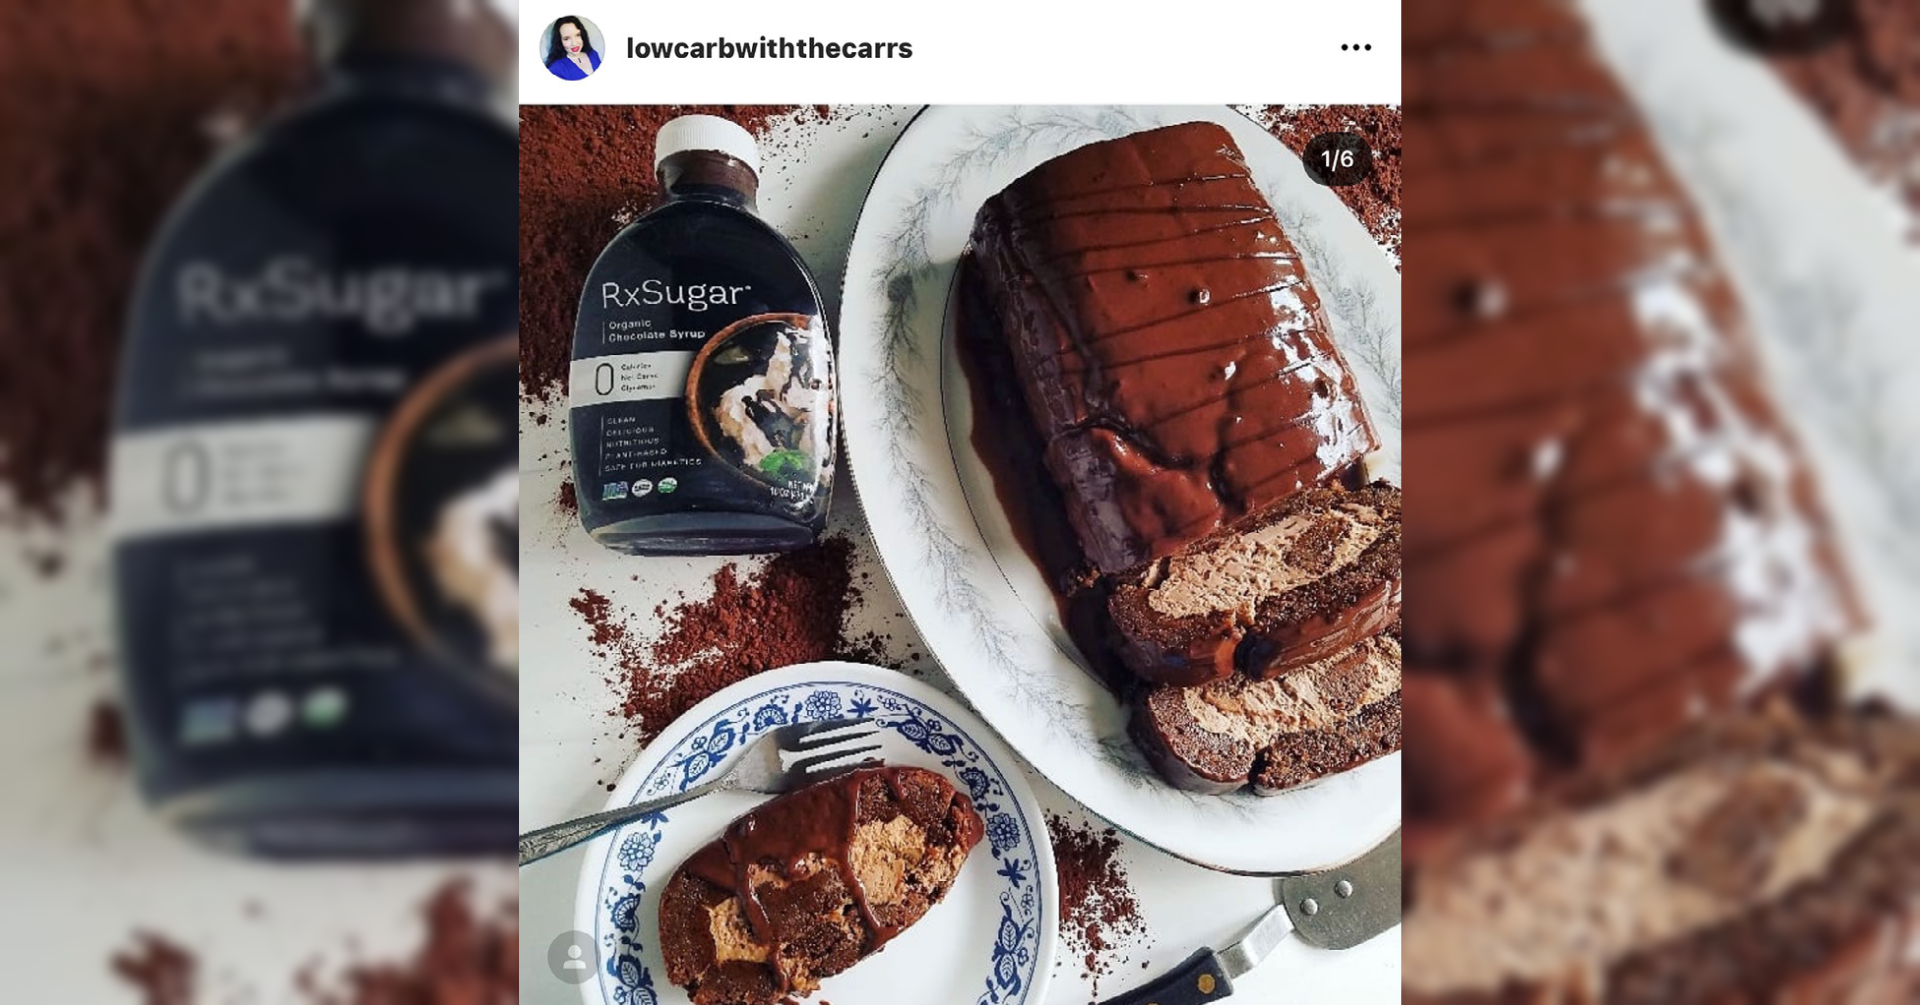 Low Carb With The Carrs Making Her Chocolate Swiss Roll Using RxSugar Organic Chocolate Syrup